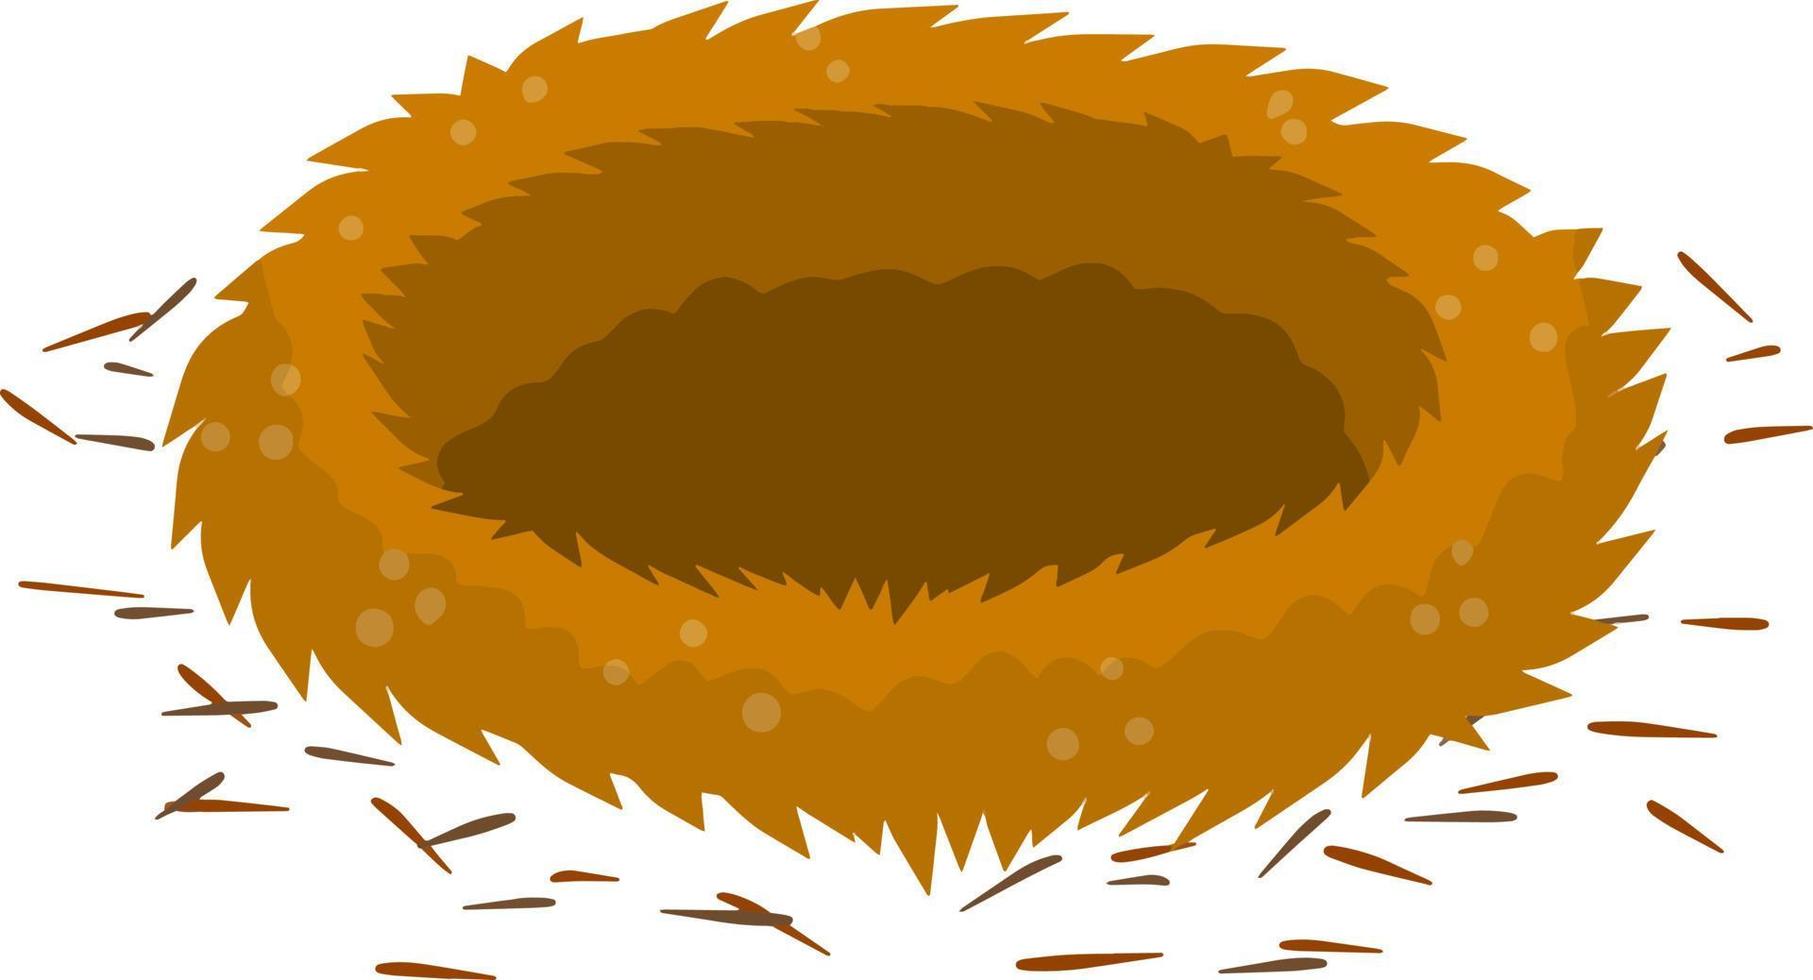 Bird nest. Element of wild nature. Cartoon flat illustration. Animal shelter of brown sticks and branches vector